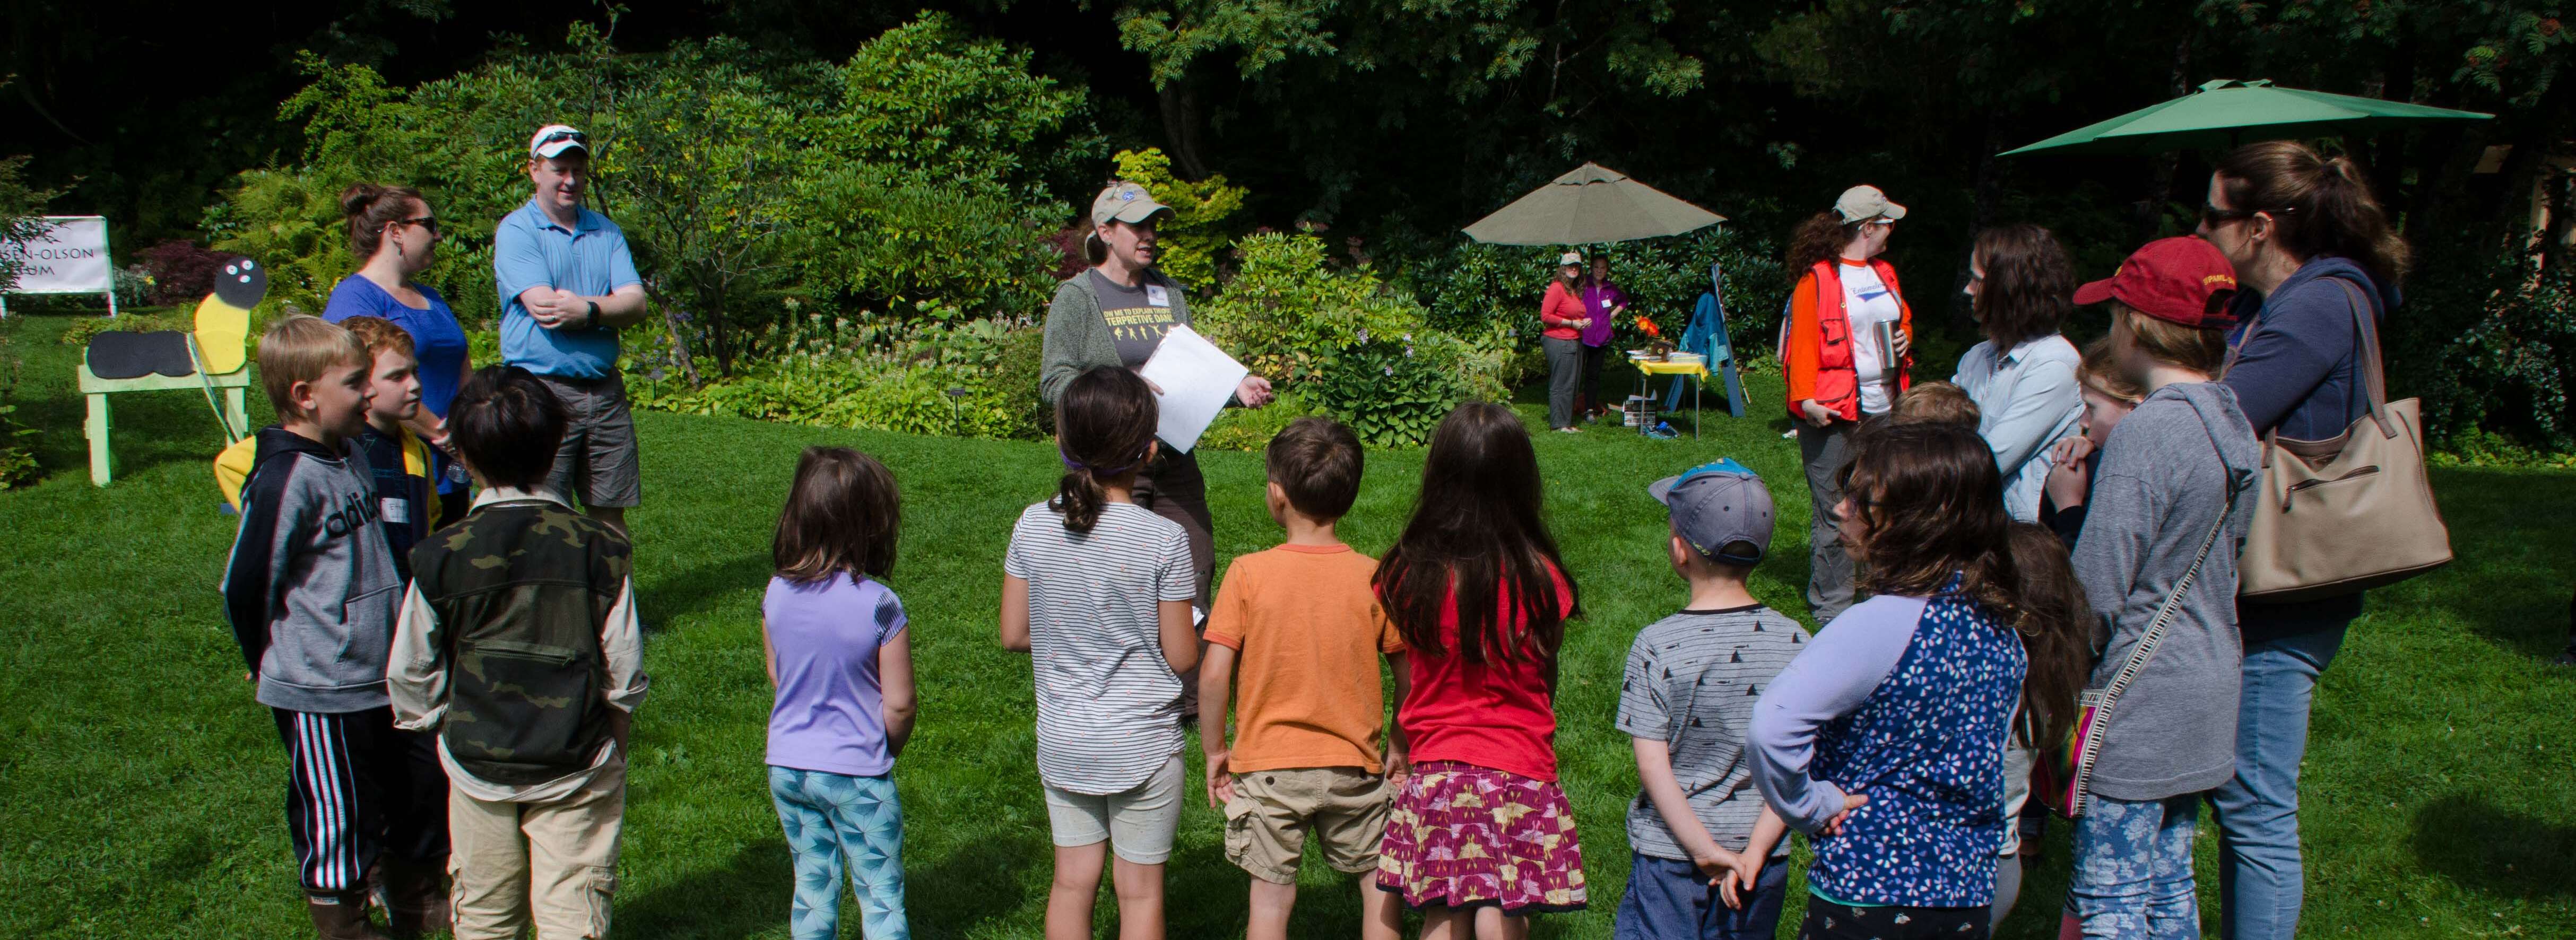 Kids gathered around on the lawn for Bug Day! at the Arboretum.